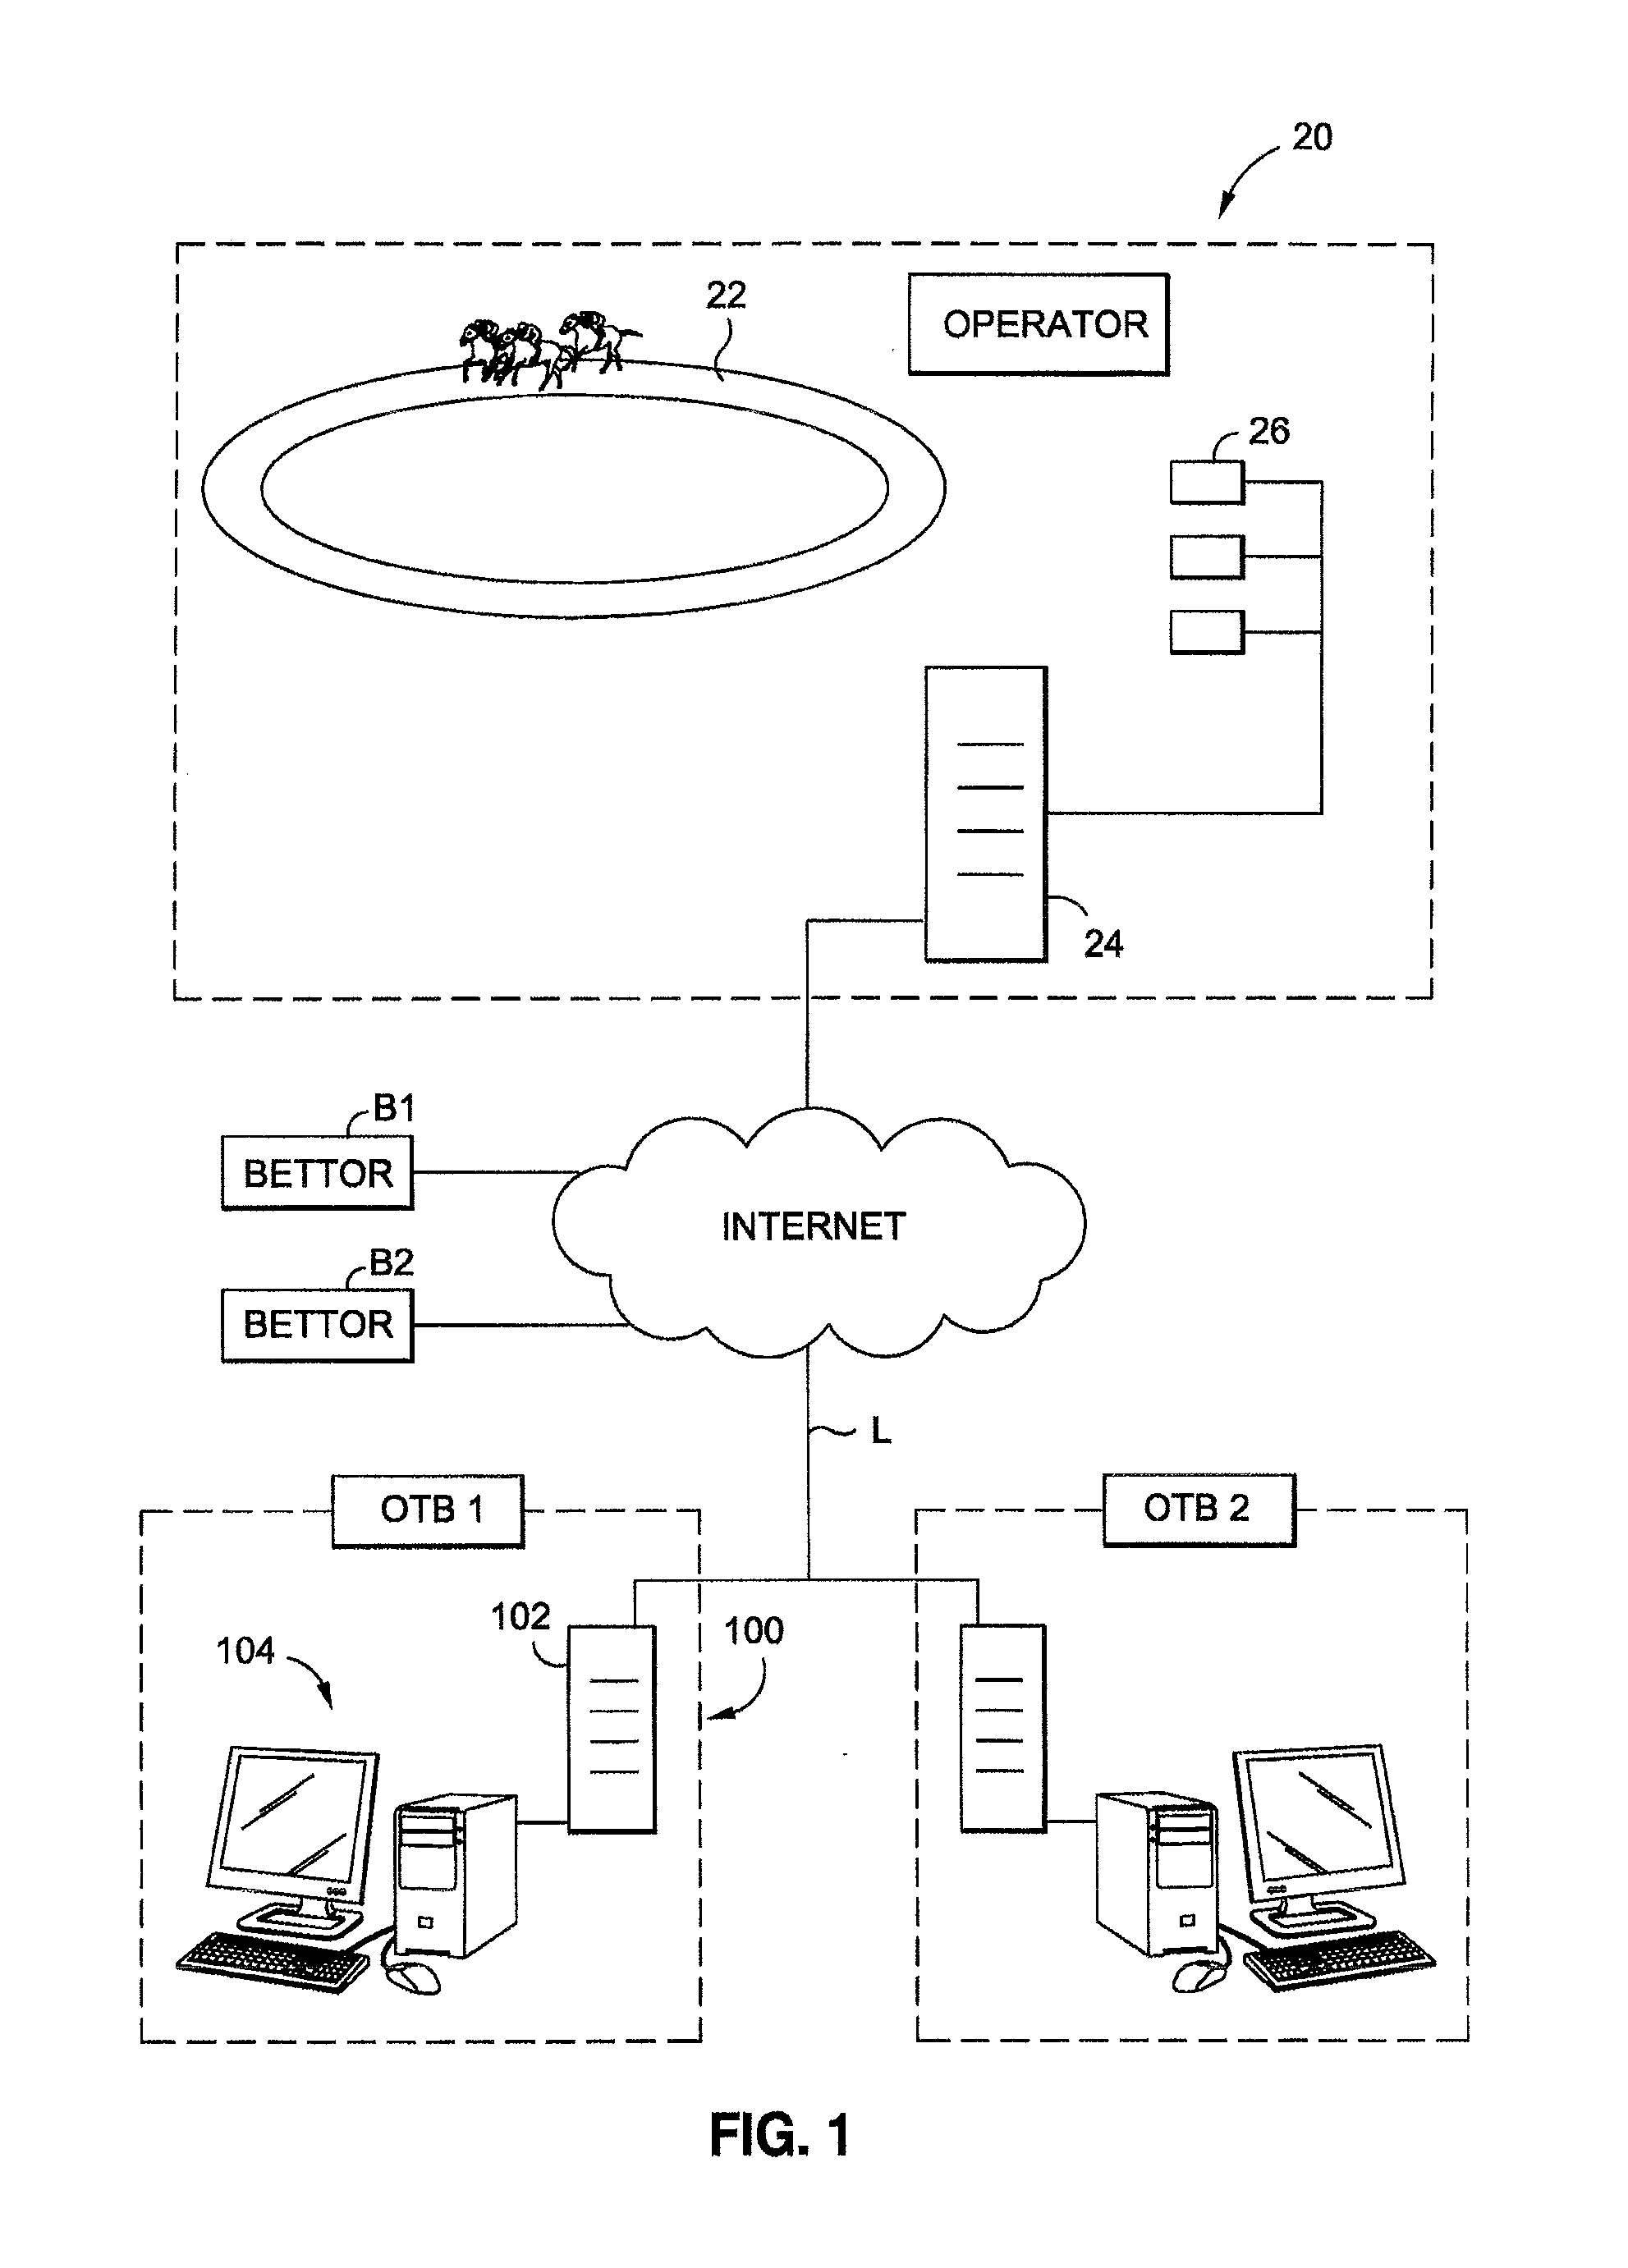 Method and system for varying the take-out or rake rate on wagers placed in a wagering pool